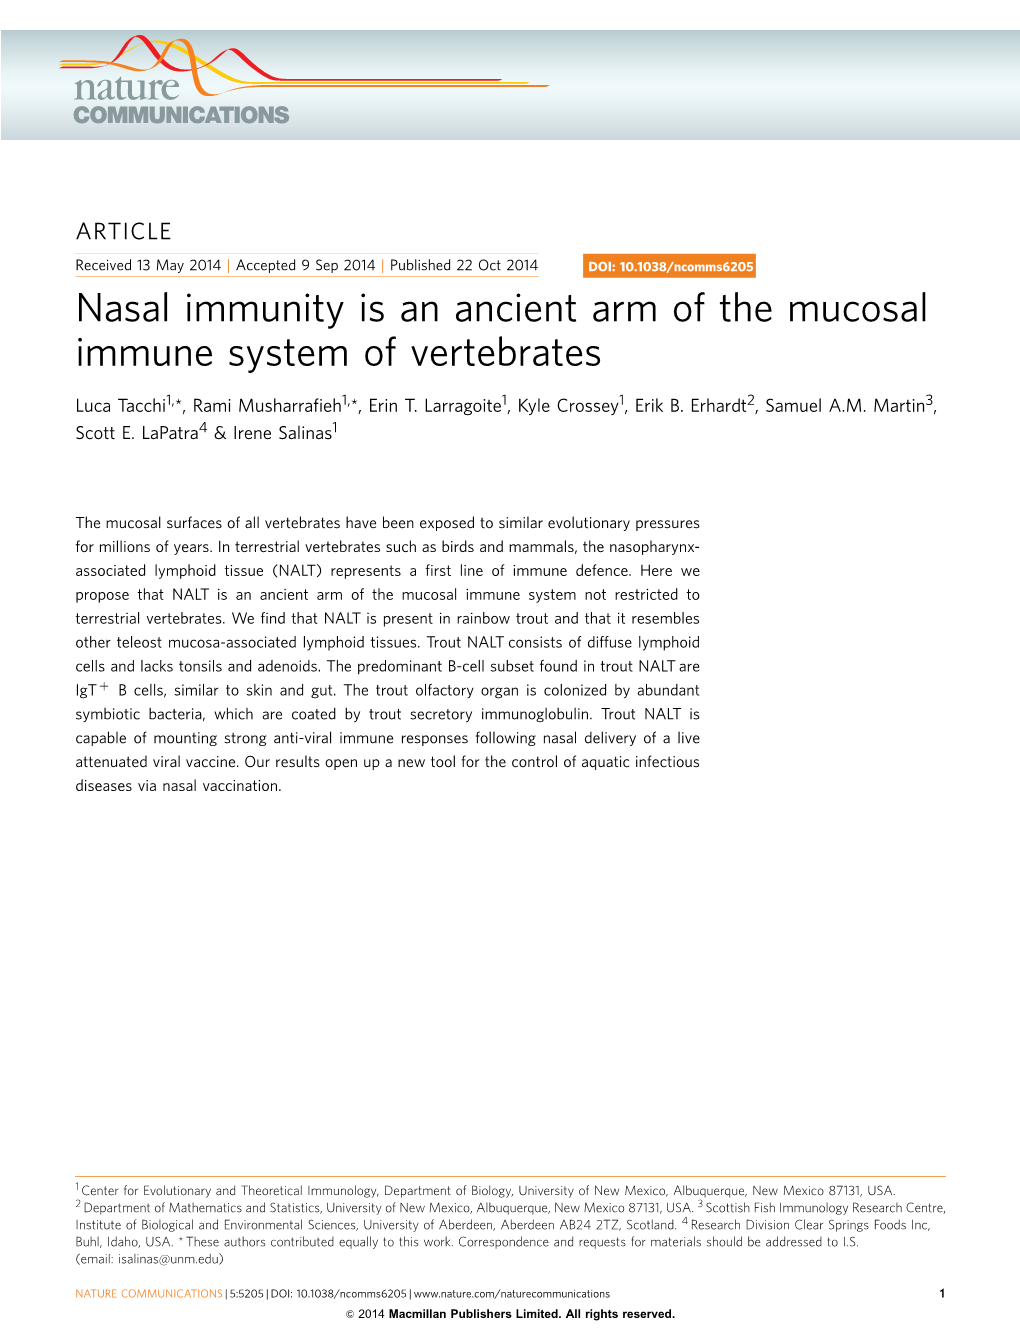 Nasal Immunity Is an Ancient Arm of the Mucosal Immune System of Vertebrates